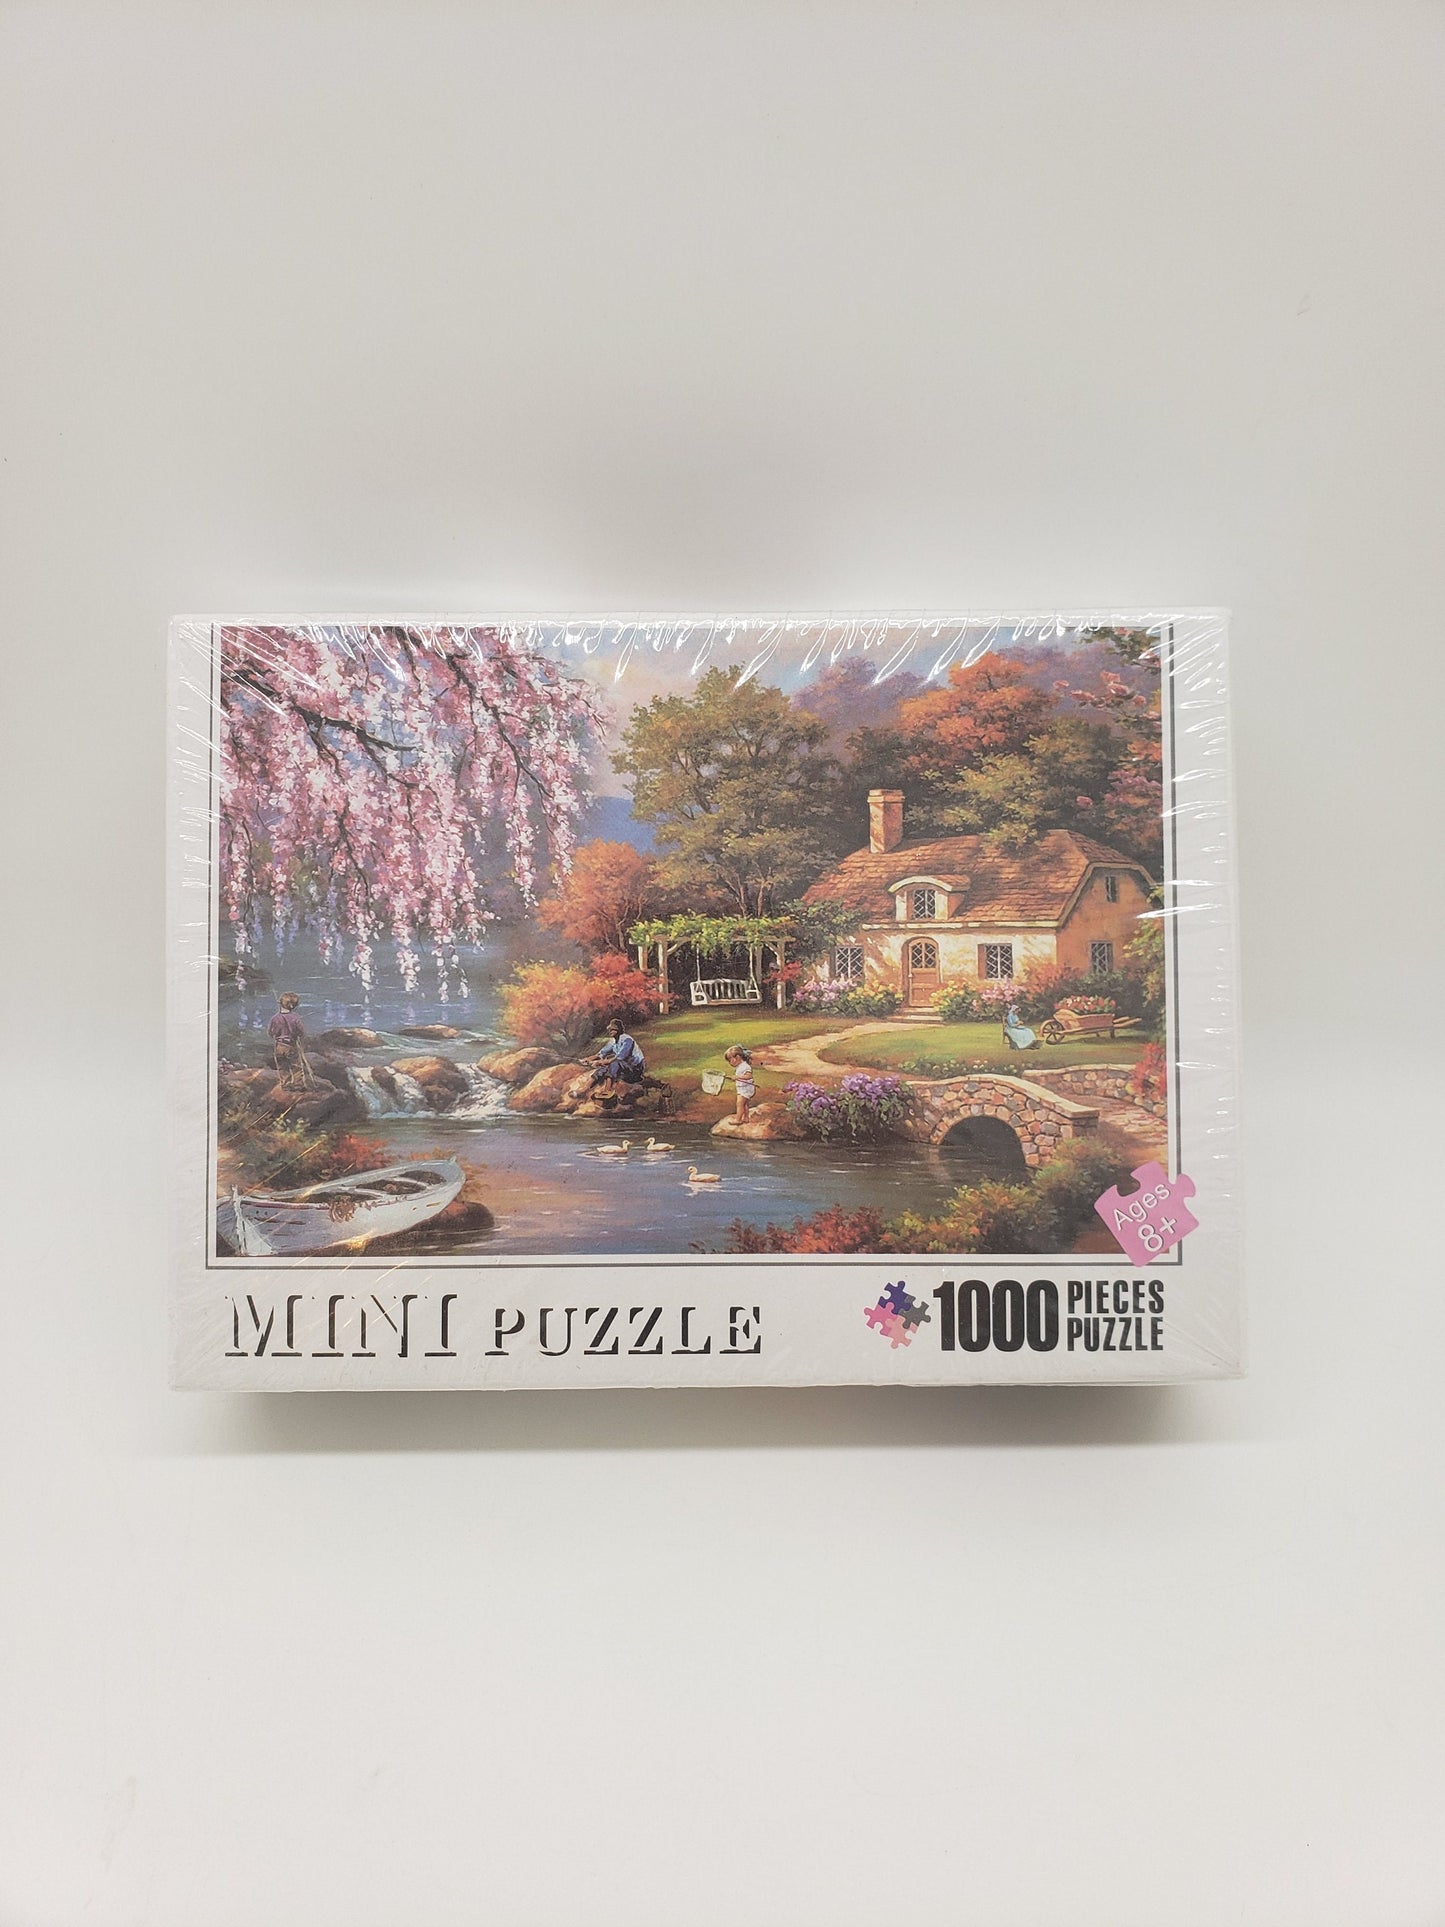 Mini Puzzle 1000 Pieces Perfect Birthday Gift Collectible Jigsaw Puzzle